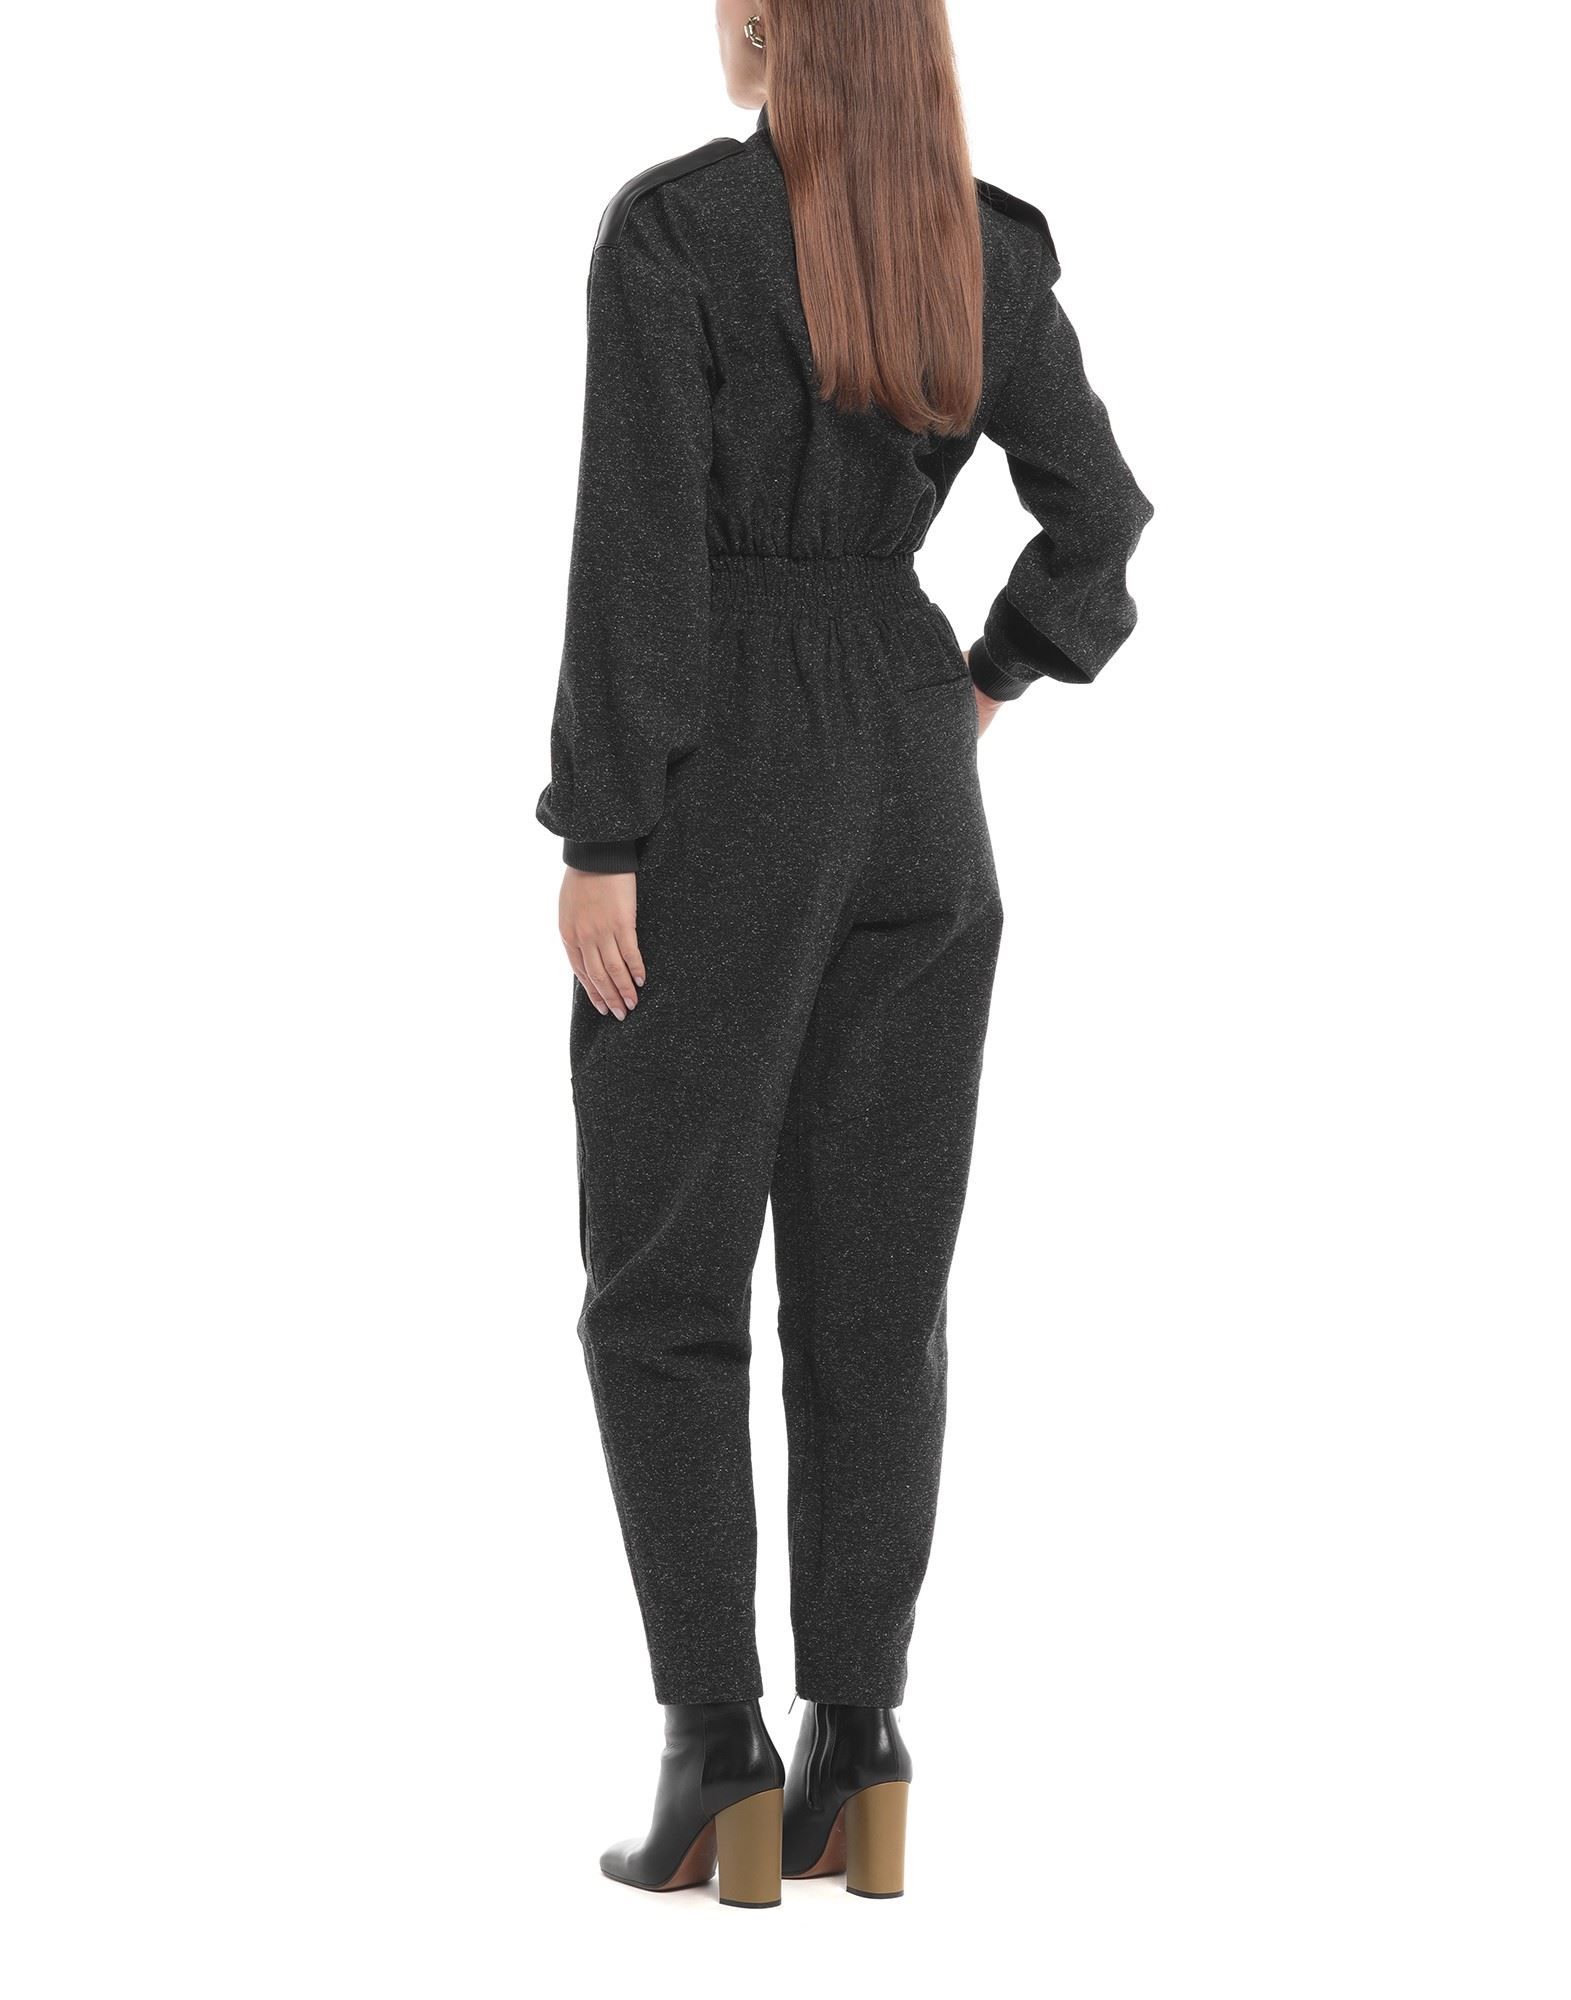 plain weave, flashes, two-tone, long sleeves, turtleneck, multipockets, zipper closure, front closure, mid rise, stretch